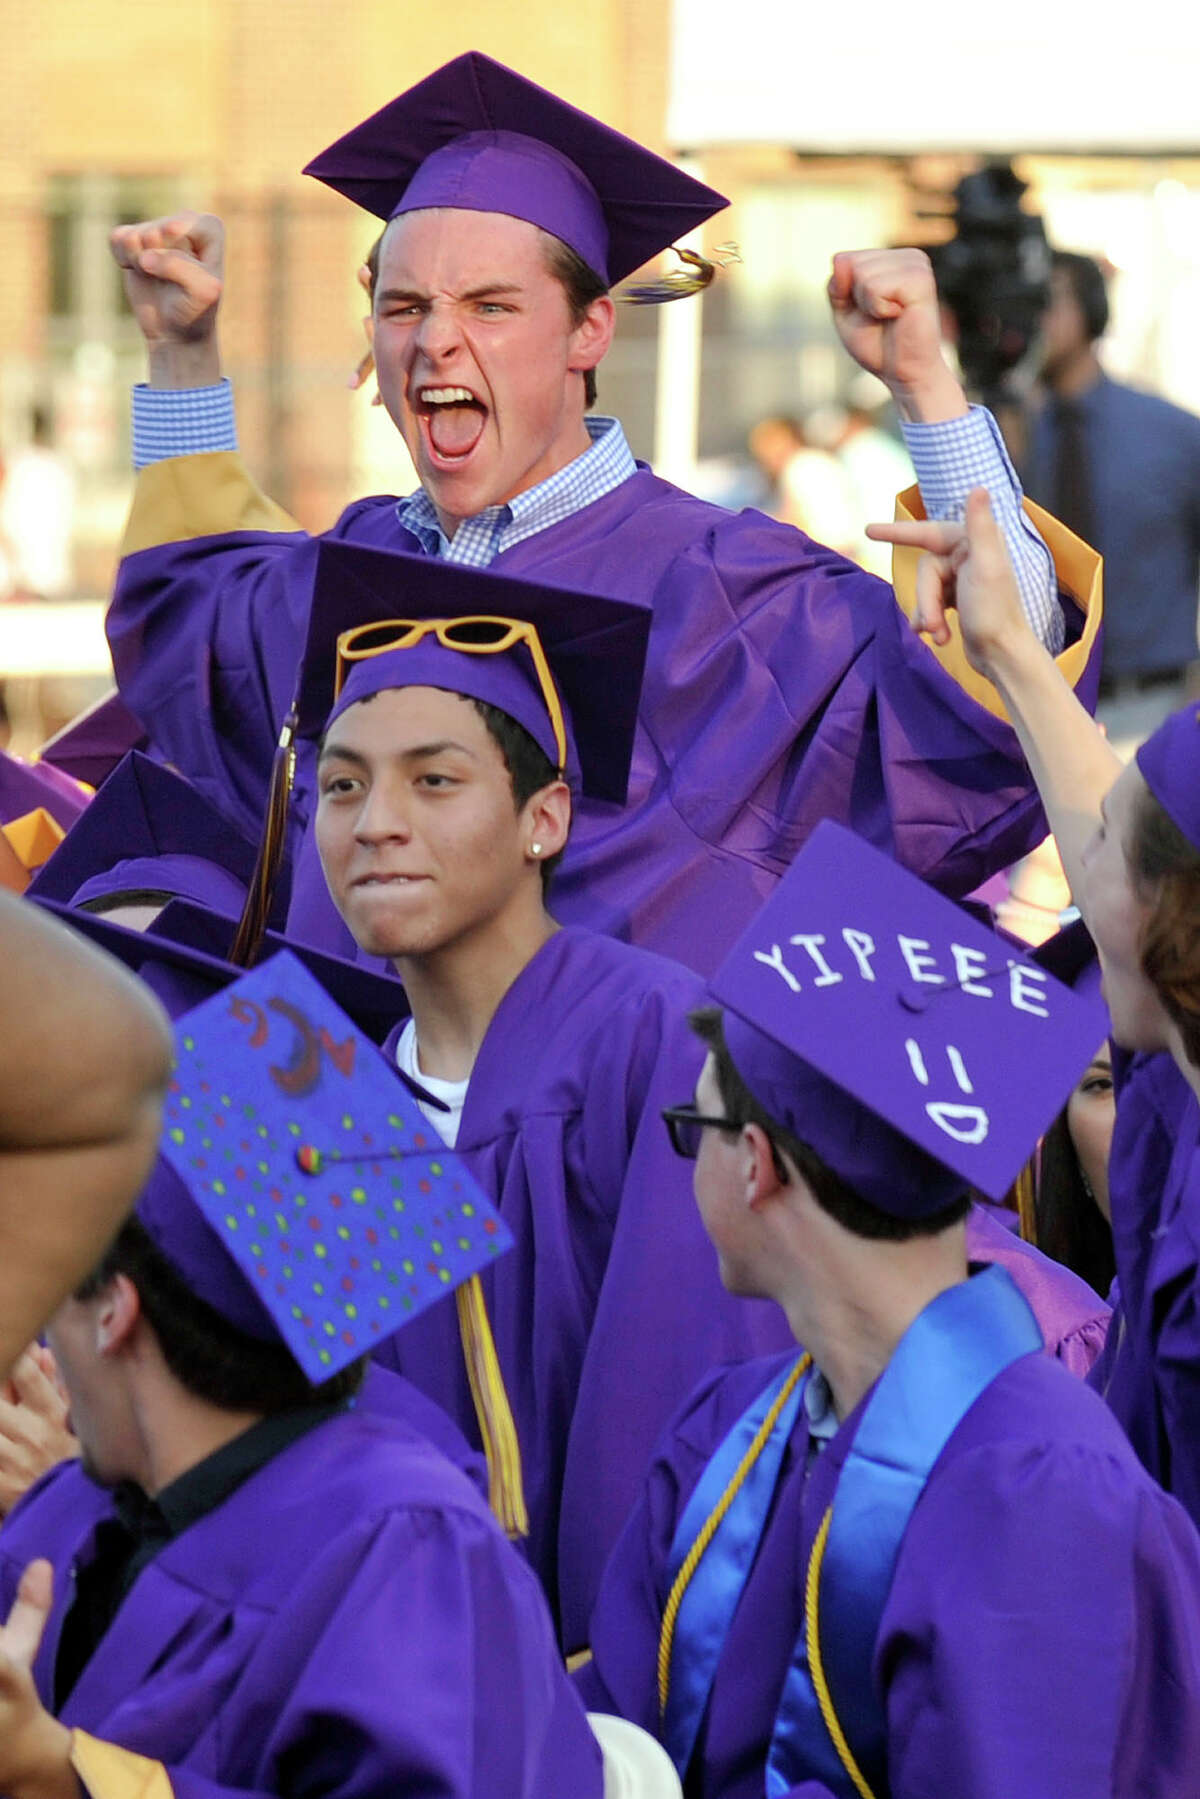 Scenes from the Westhill graduation ceremony at Westhill High School in Stamford, Conn., on Thursday, June 19, 2014.